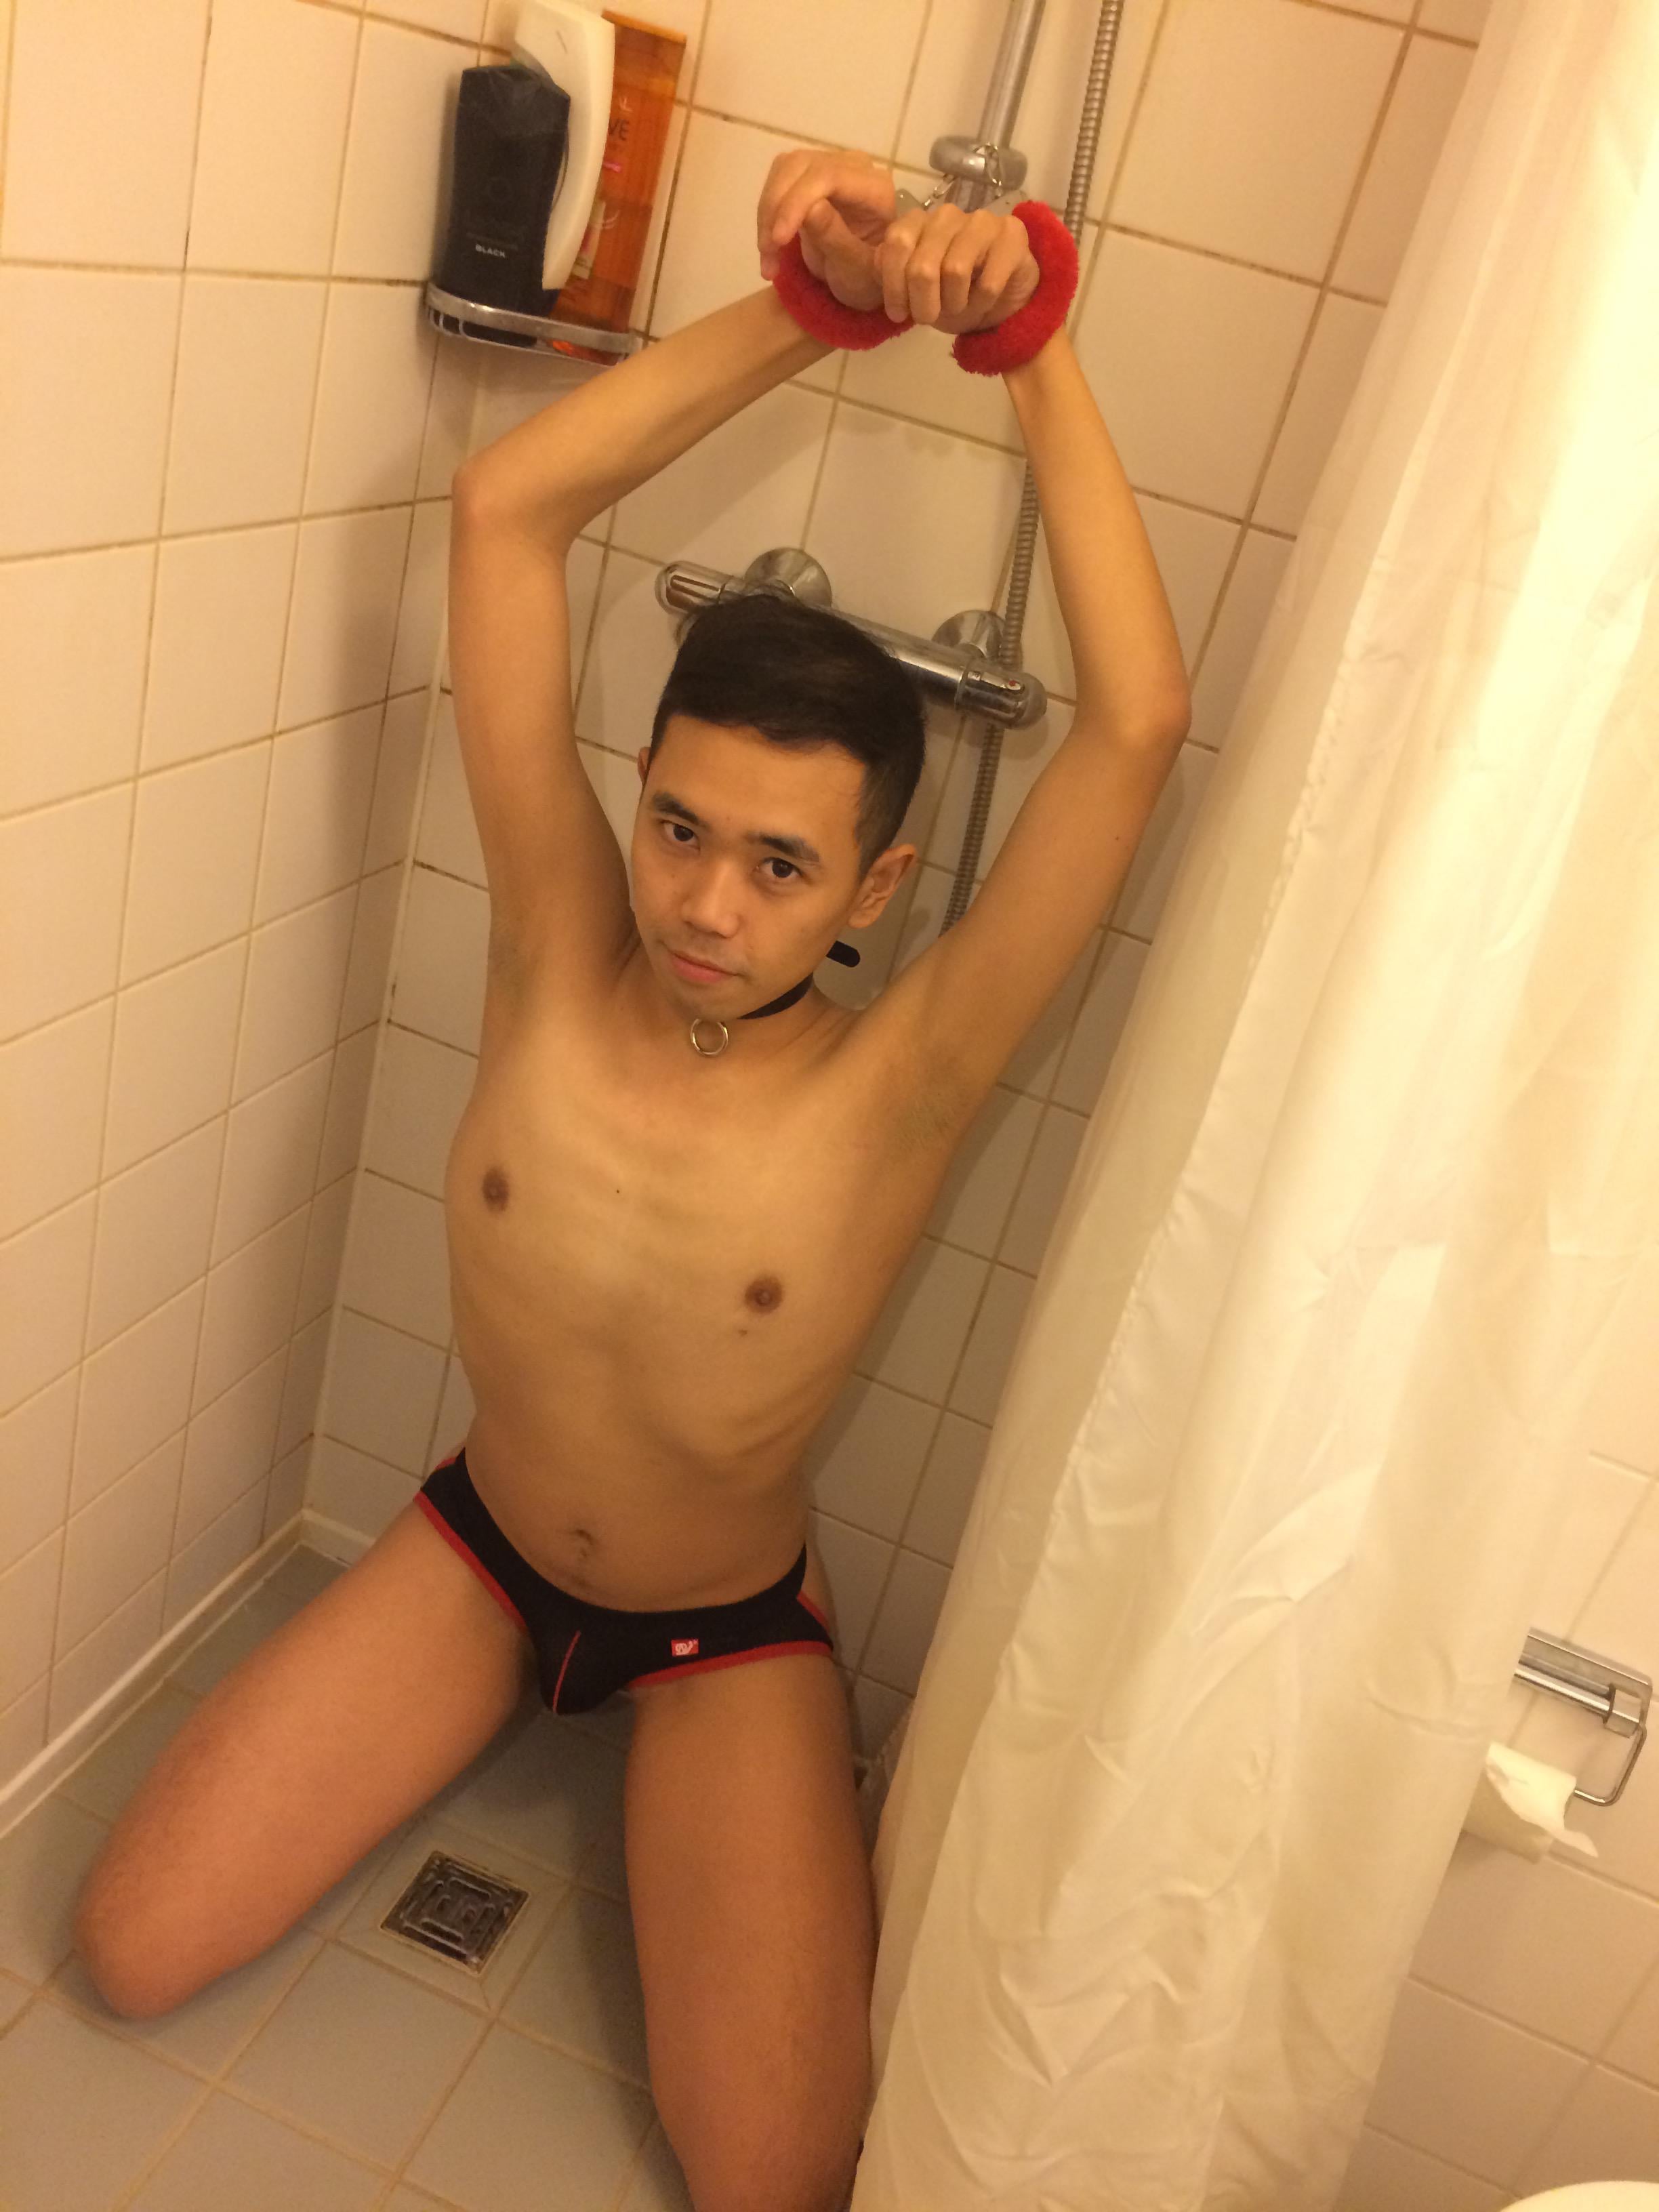 A fag for deep throating in the shower